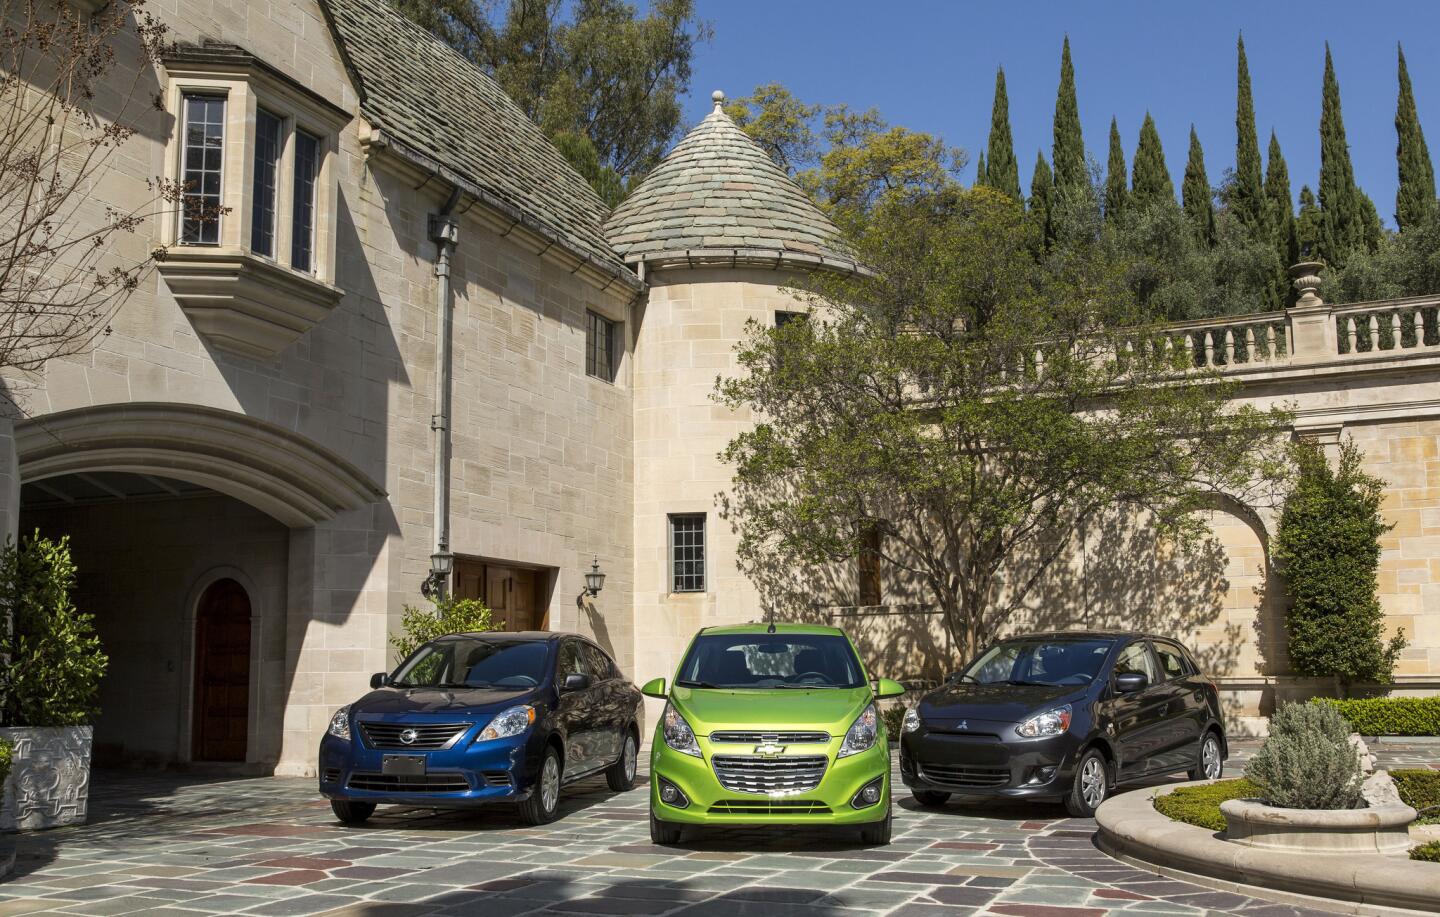 The Nissan Versa, left, Chevy Spark and Mitsubishi Mirage at the Greystone Mansion in Beverly Hills. These are the cars for people who want nothing more than the cheapest possible transportation, who view driving as a chore.